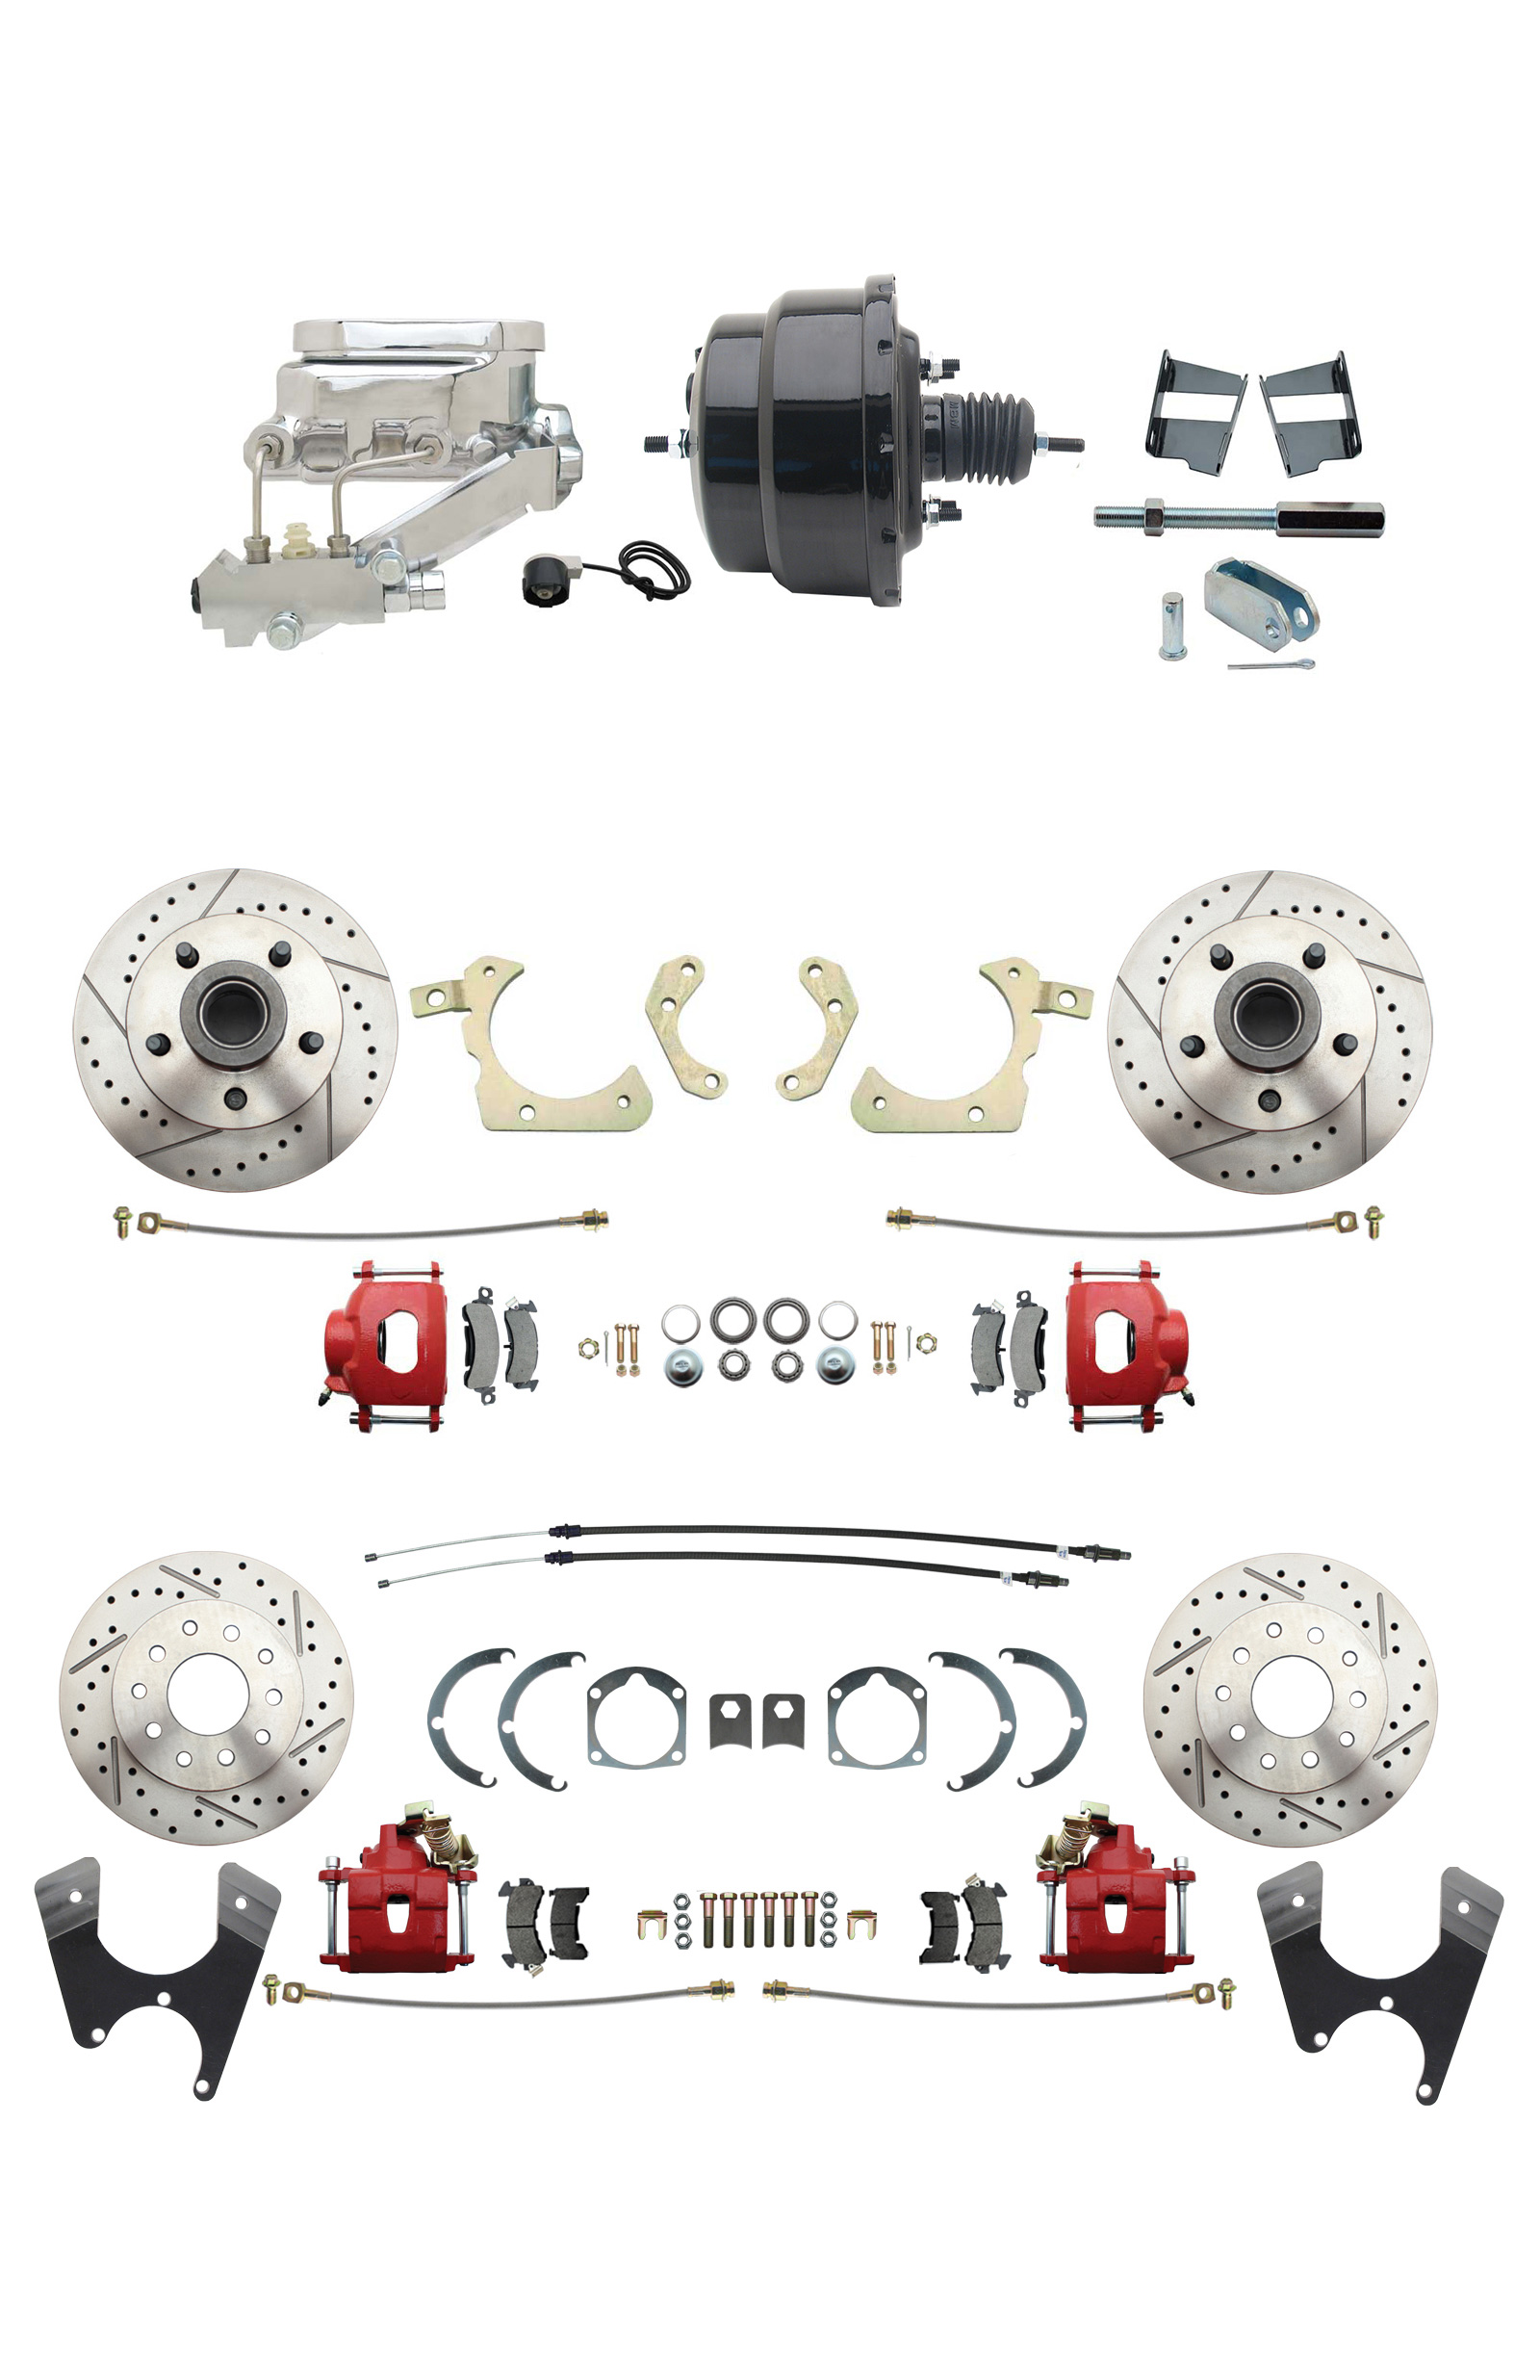 1959-1964 GM Full Size Front & Rear Power Disc Brake Kit Red Powder Coated Calipers Drilled/Slotted Rotors (Impala, Bel Air, Biscayne) & 8 Dual Chrome Booster Conversion Kit W/ Flat Top Chrome Master Cylinder Bottom Mou